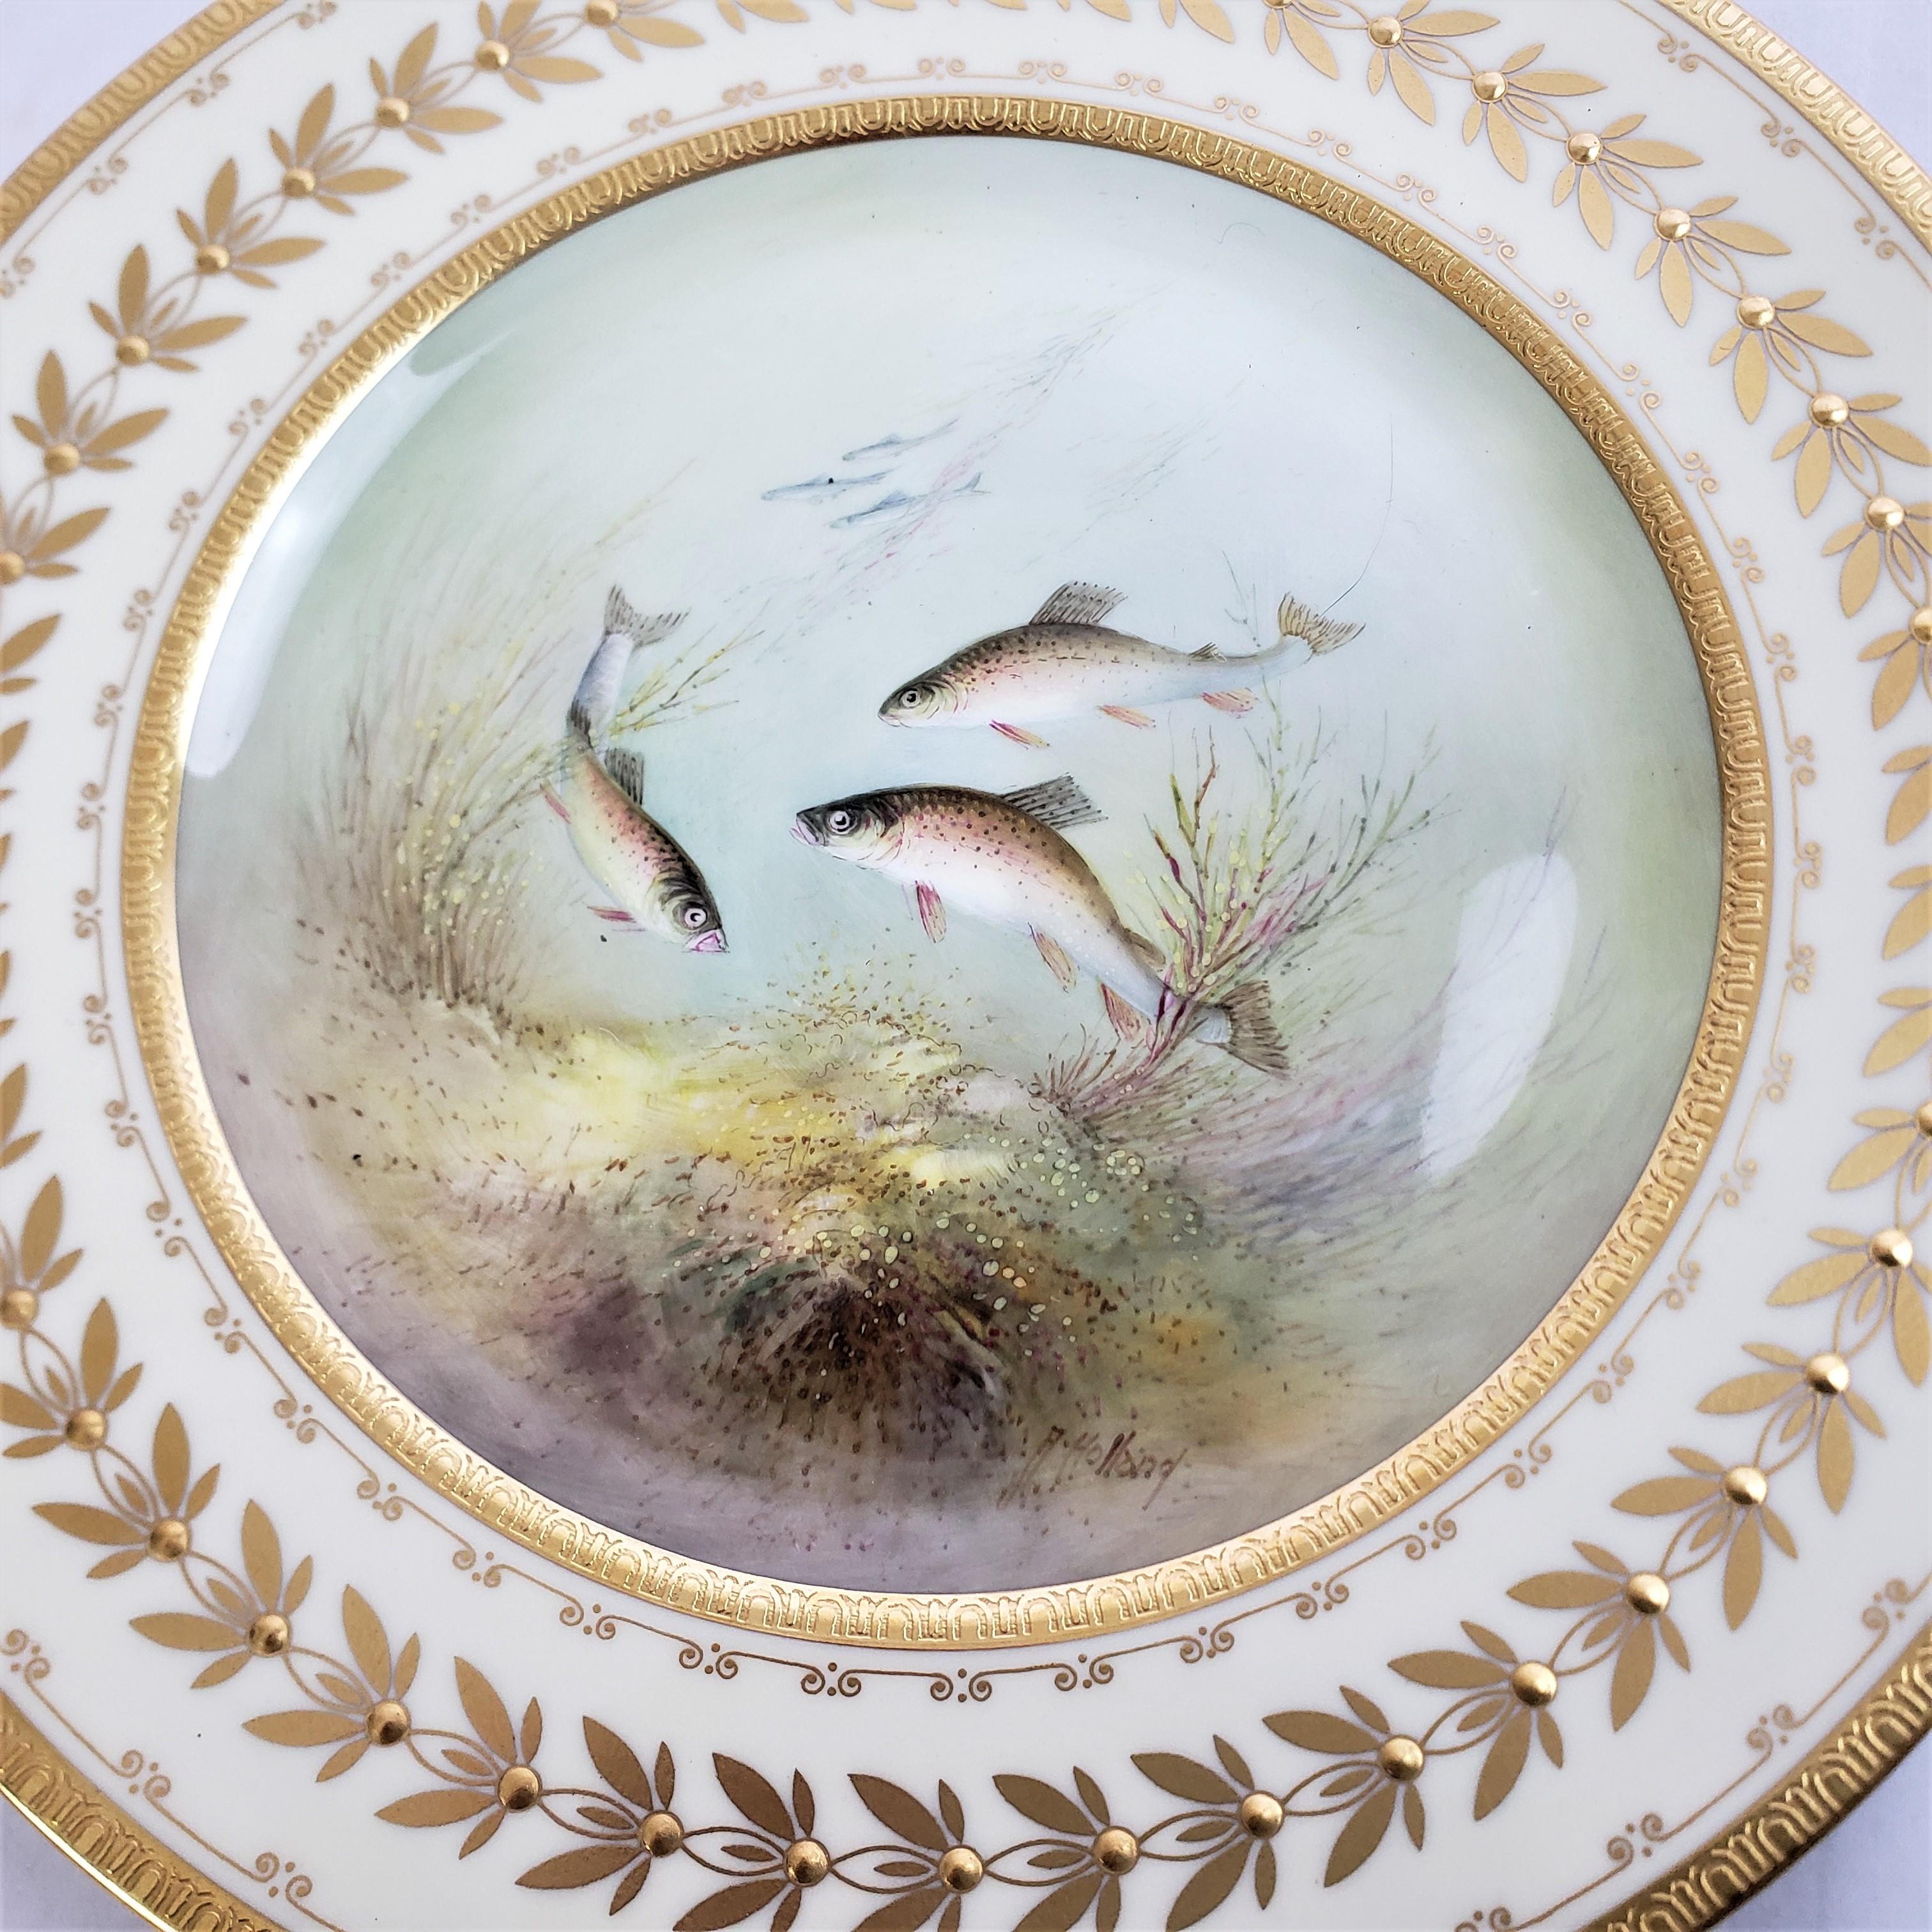 Gilt 12 Antique Minton Hand-Painted Cabinet Plates Signed A. Holland Depicting Fish For Sale